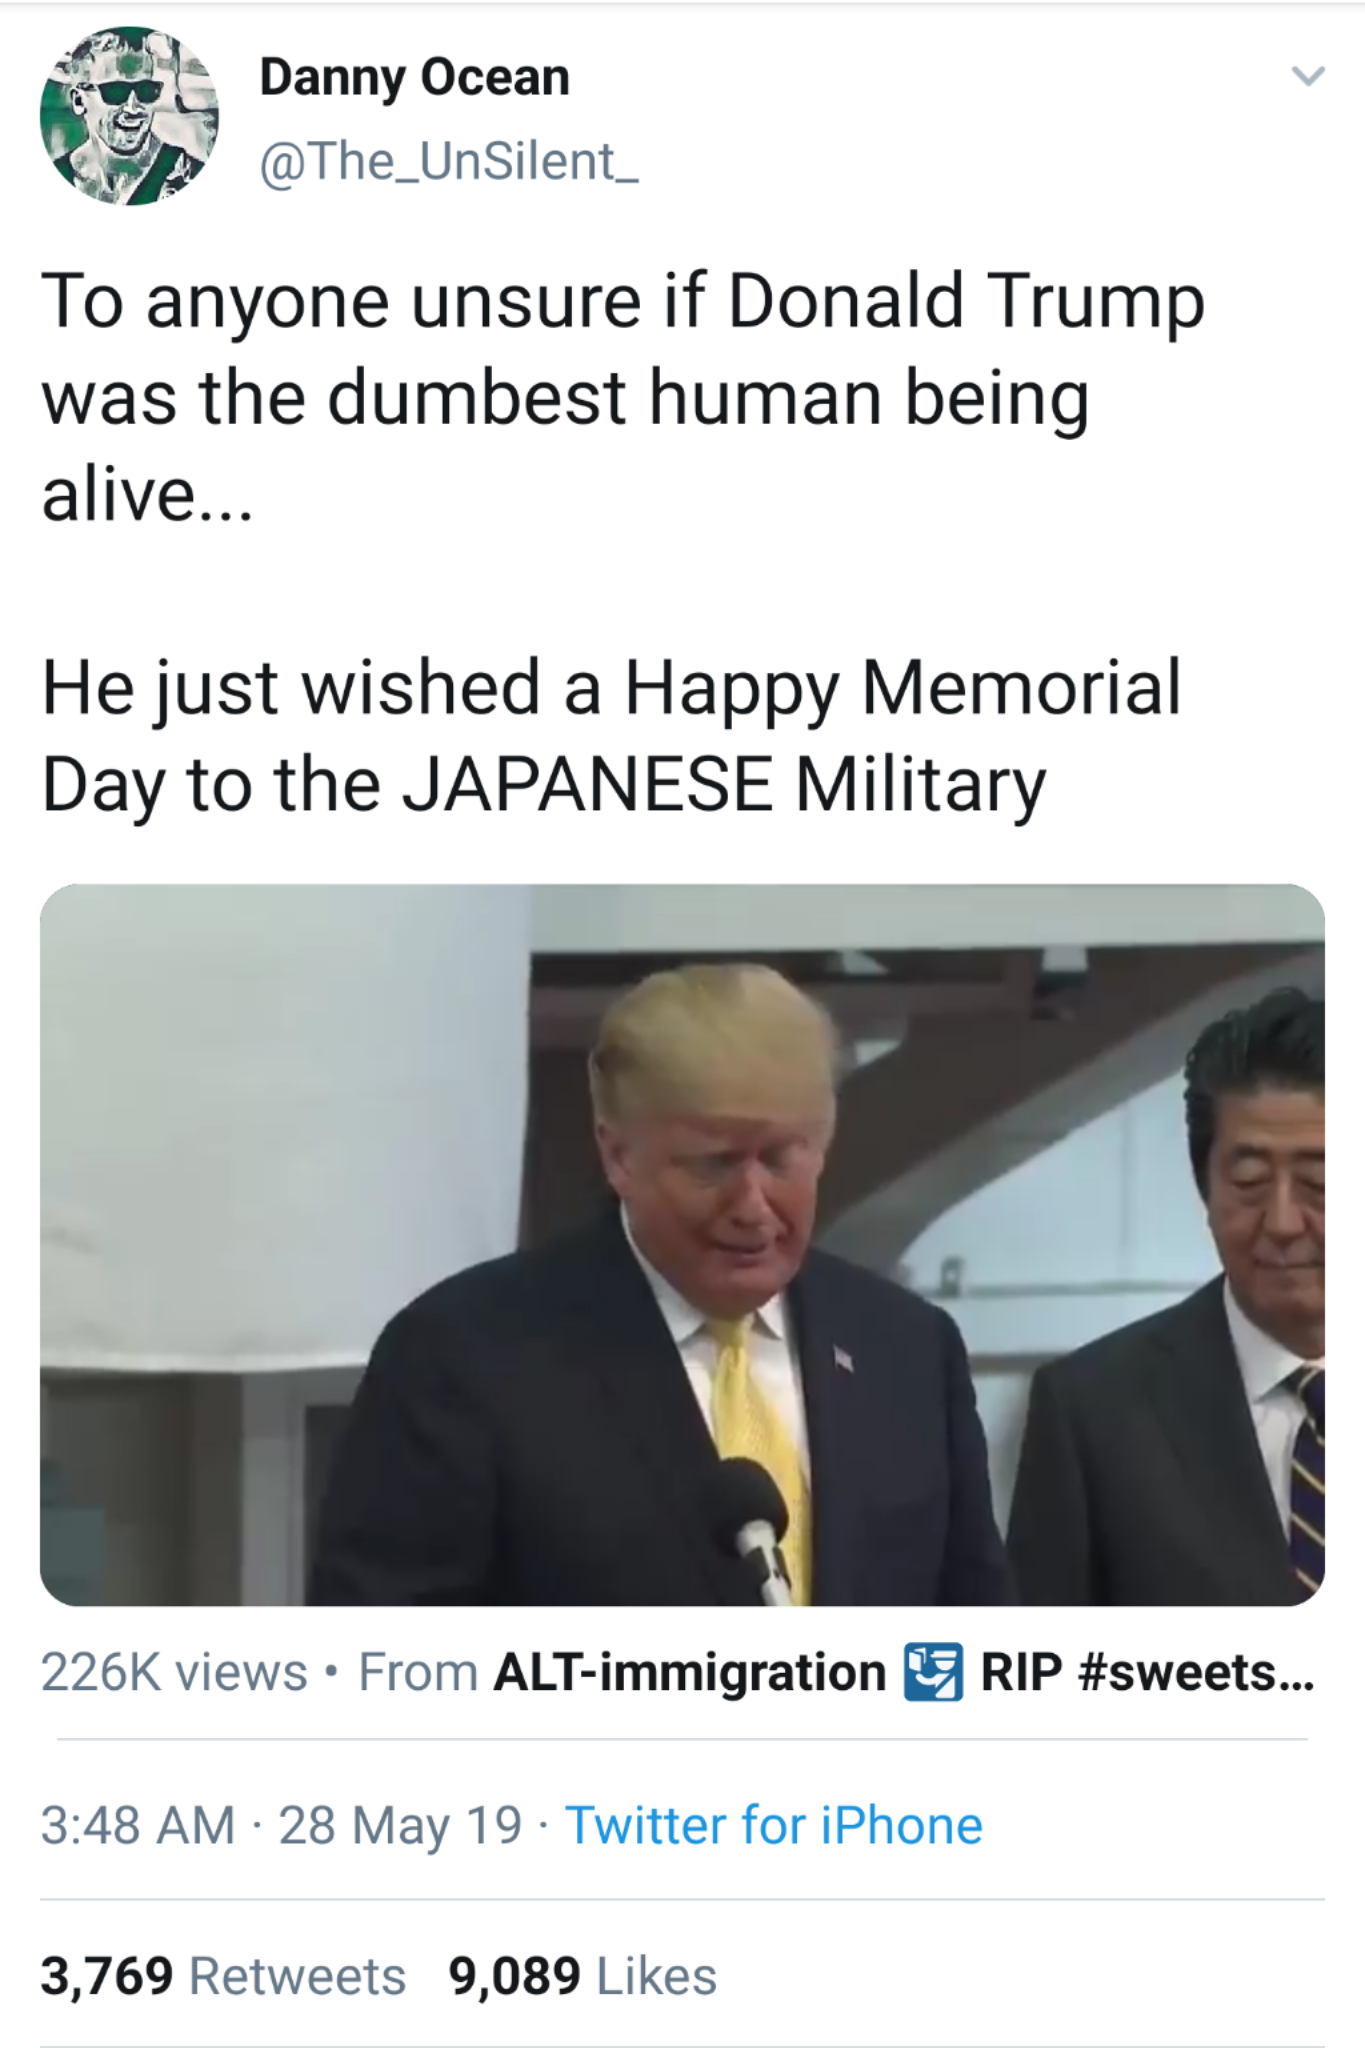 krassenstein twitter - Danny Ocean To anyone unsure if Donald Trump was the dumbest human being alive... He just wished a Happy Memorial Day to the Japanese Military views. From Altimmigration Rip ... 28 May 19. Twitter for iPhone 3,769 9,089